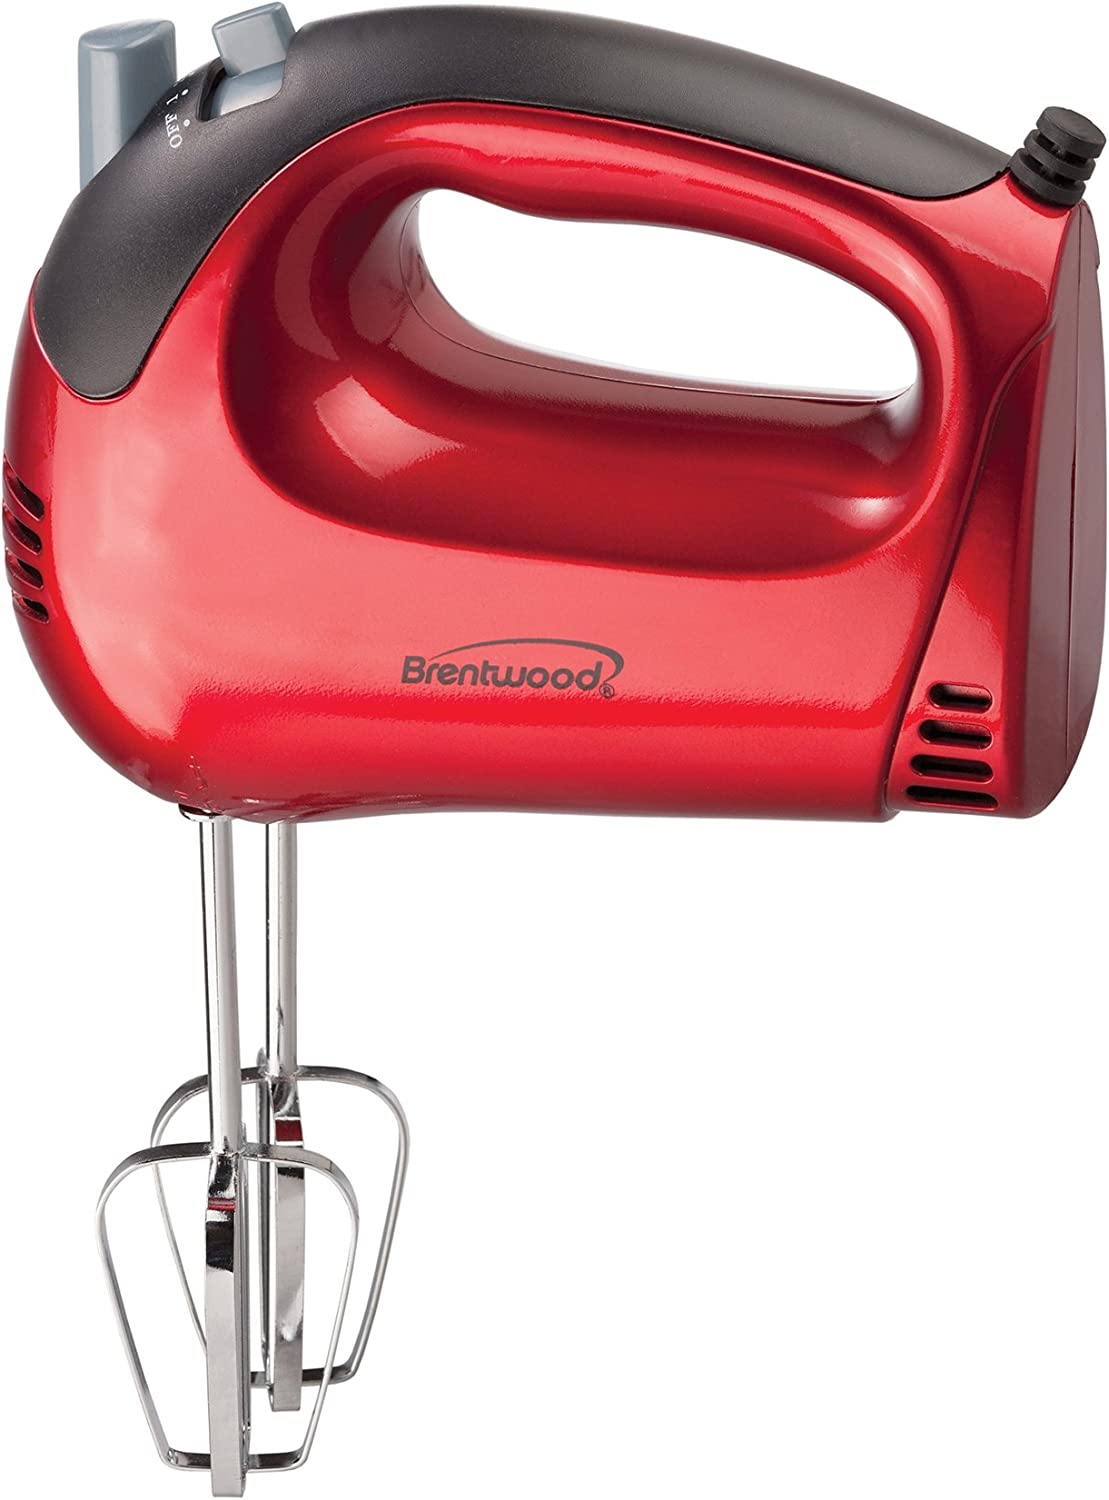 Brentwood Electric Hand Mixer, Lightweight 5-Speed, Red Import To Shop ×Product customization General Description Gallery